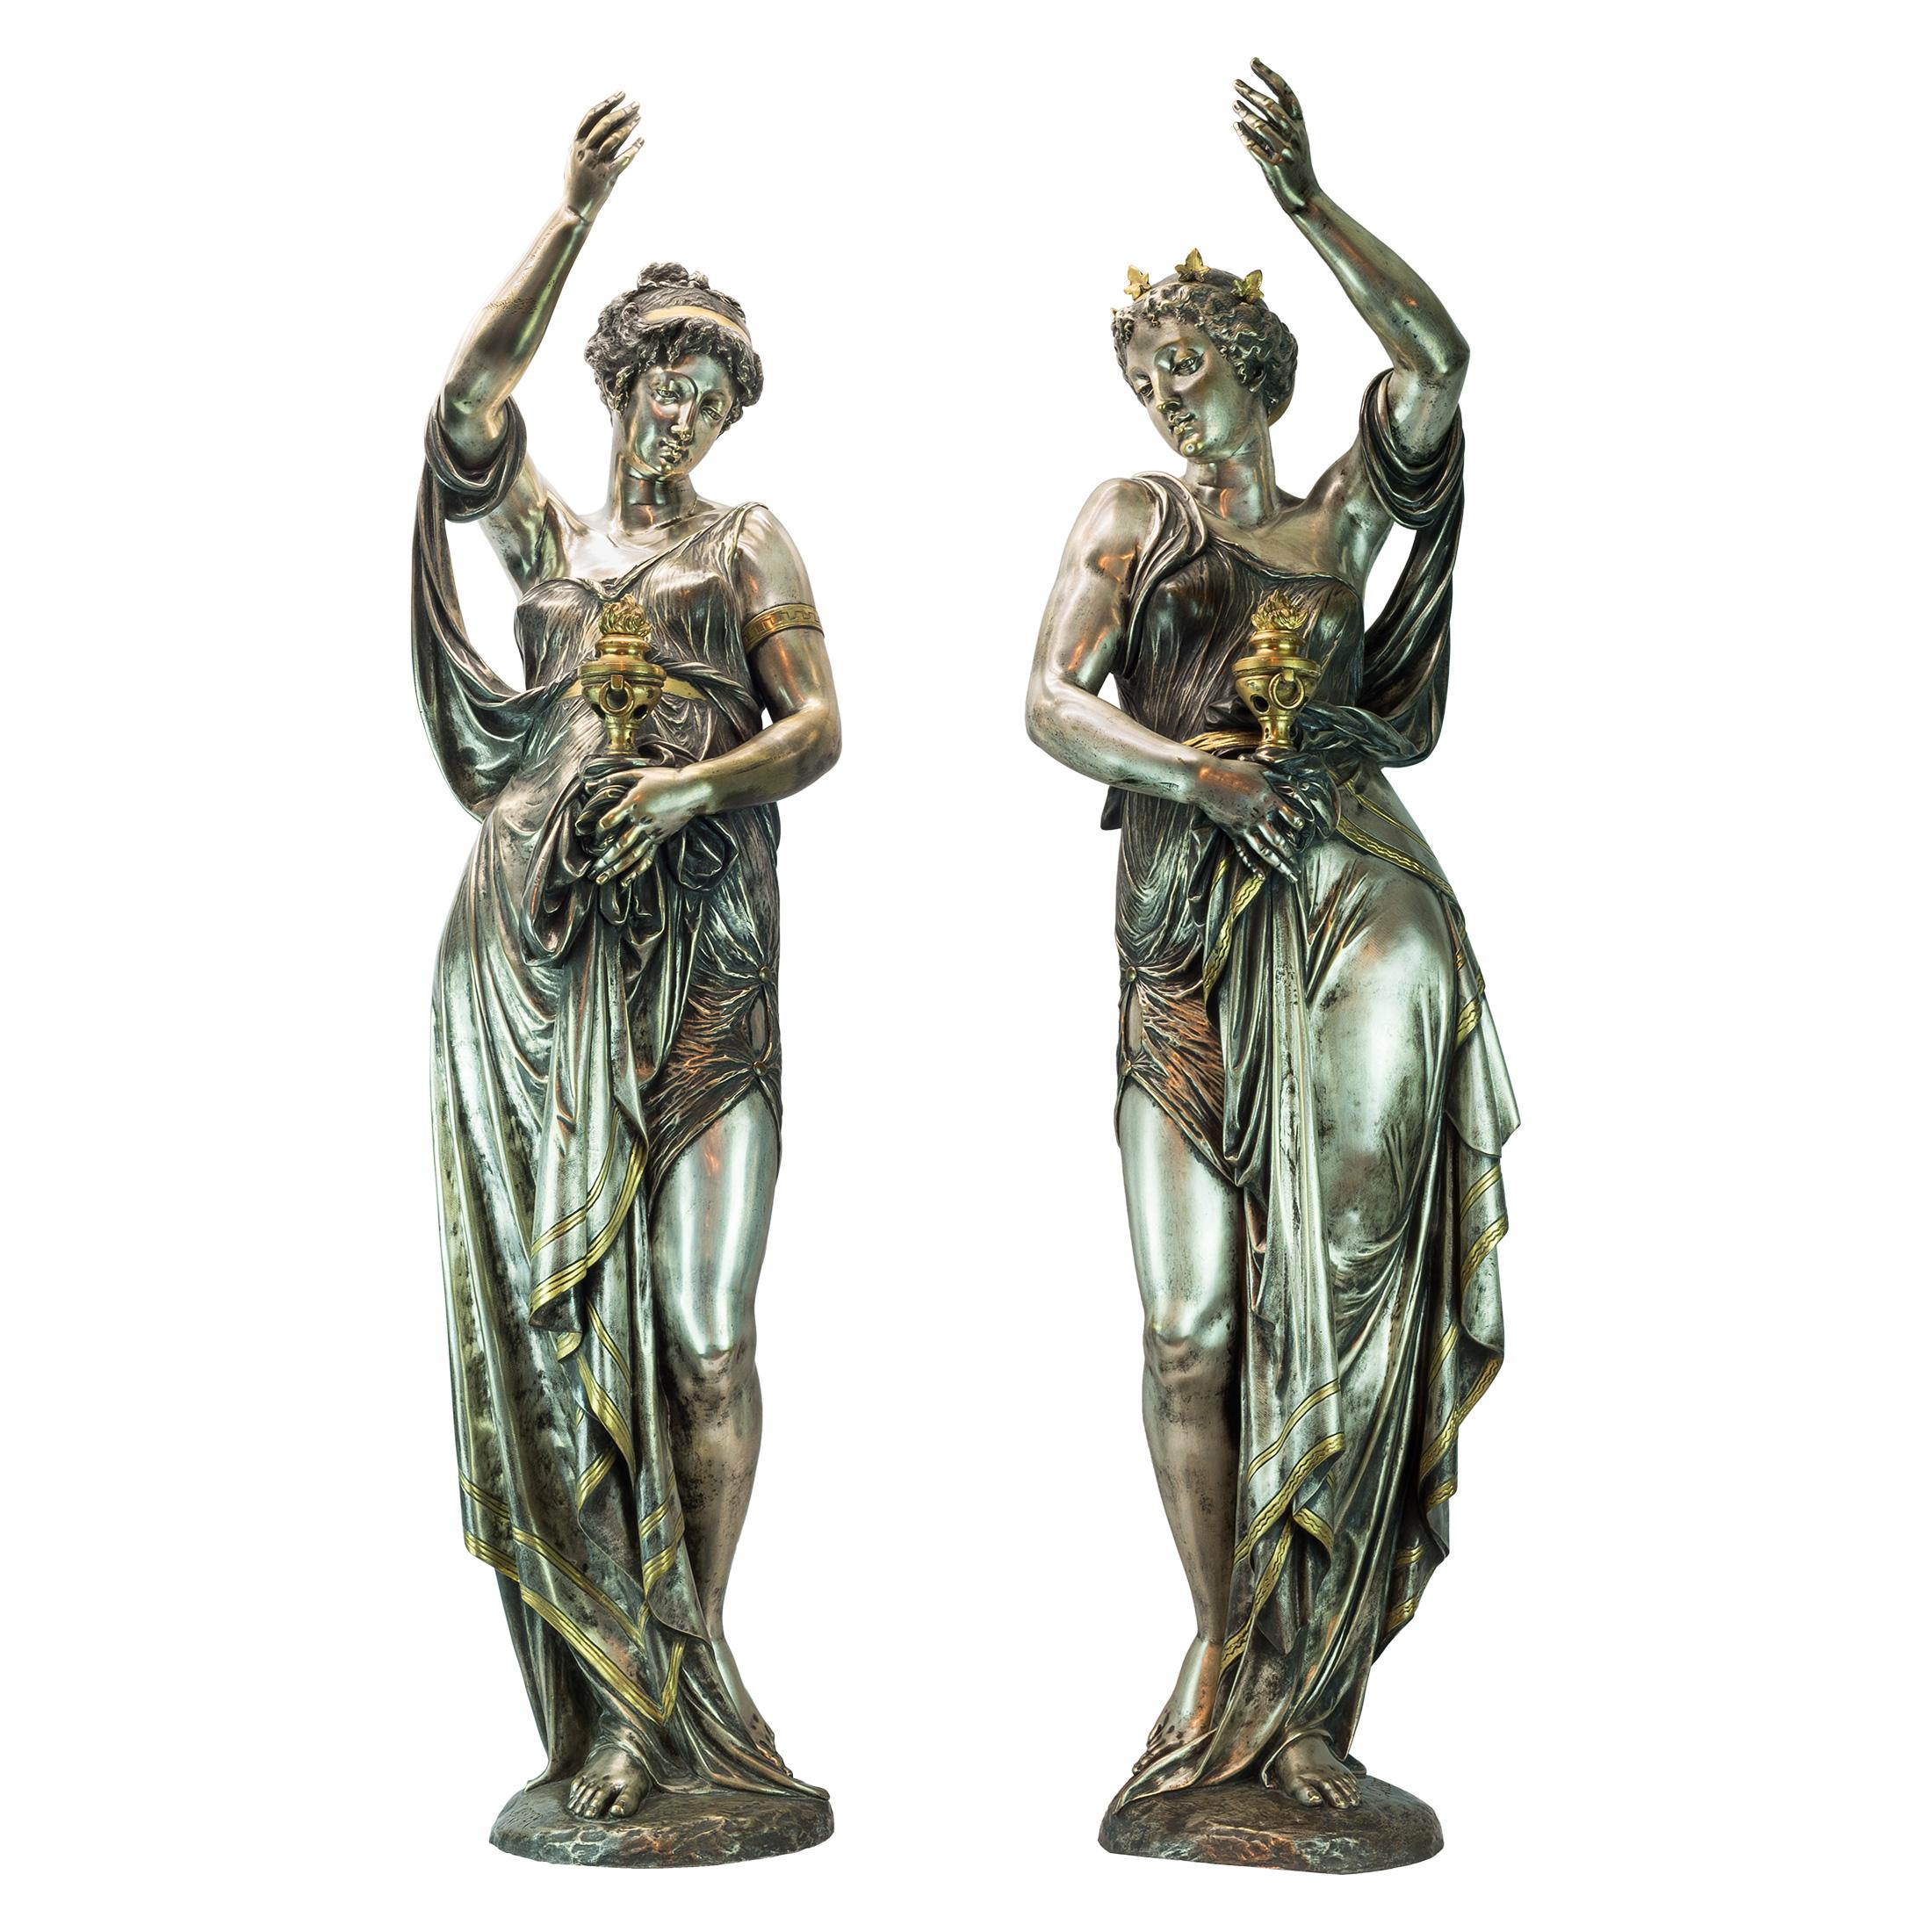 Pair of Highly Important Exposition Neo-Grec Silvered and Gilt Bronze Figural Bacchante Torchères.
 
Artist: Albert-Ernest Carrier-Belleuse (1824-1887)
Origin: French
Date:third quarter 19th century
Inscription: one figure inscribed CARRIER,